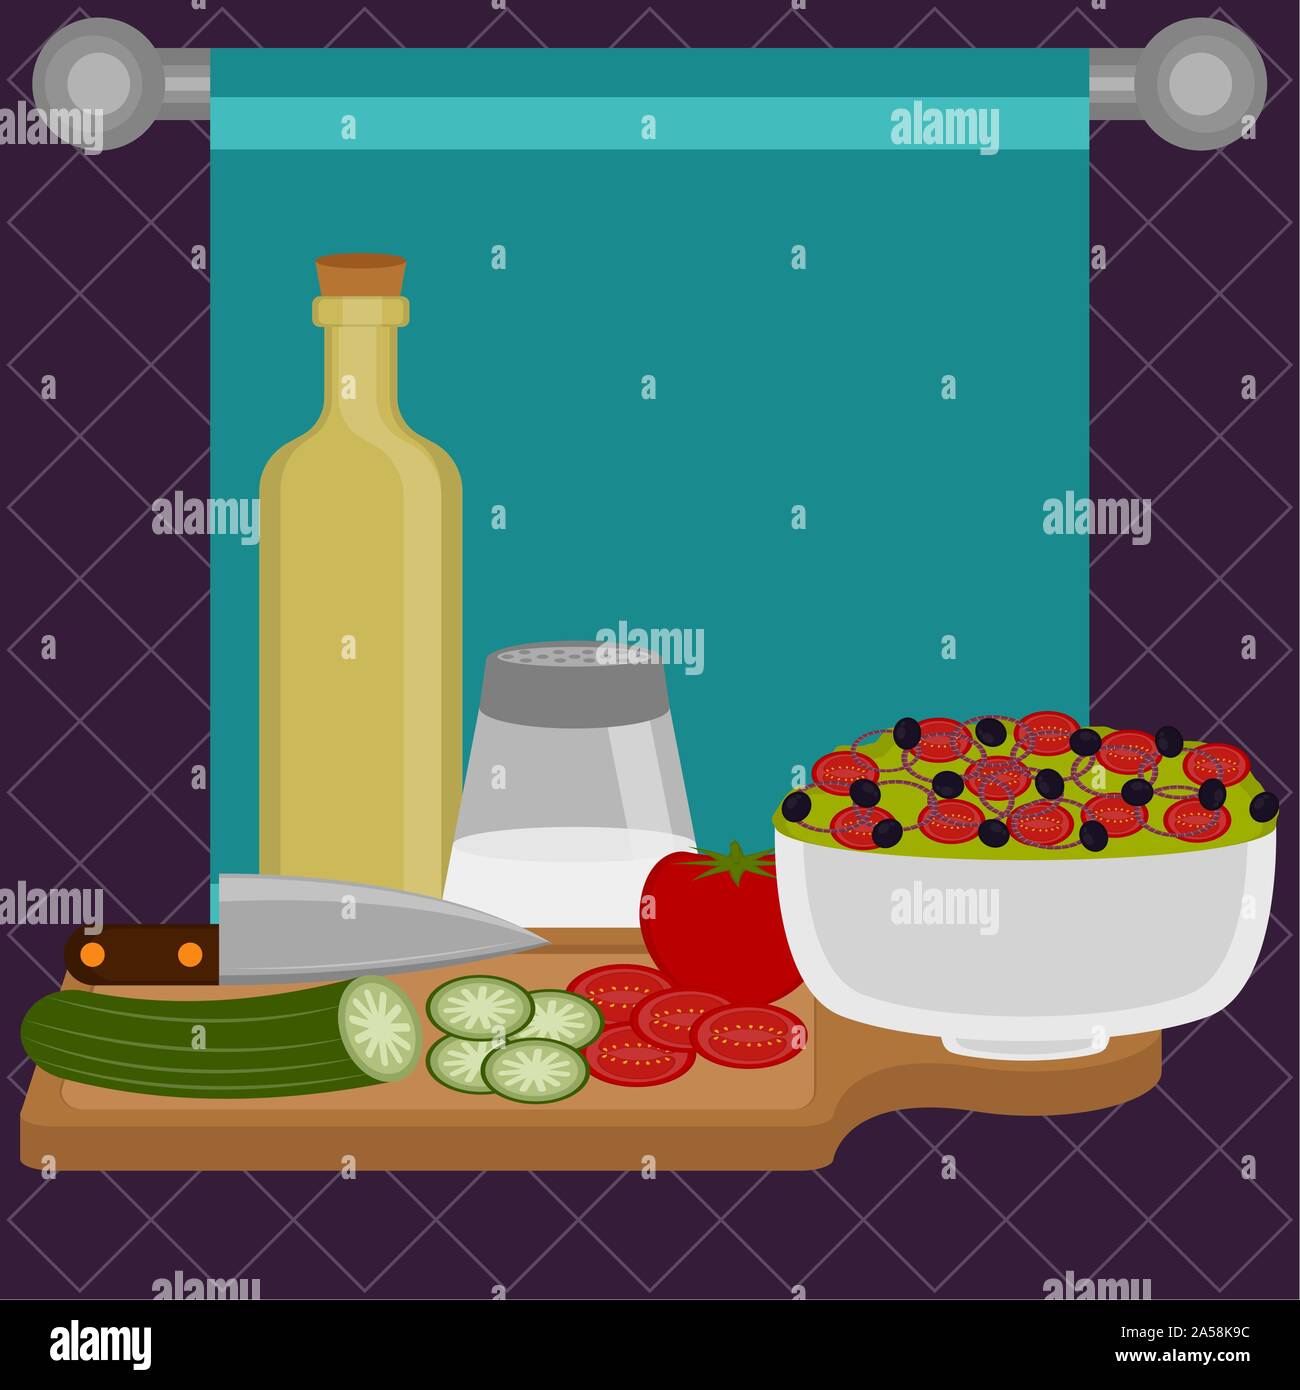 Vegetables cut on a cuttien board with a saldad in a bowl. Food preparation - Vector illustration Stock Vector